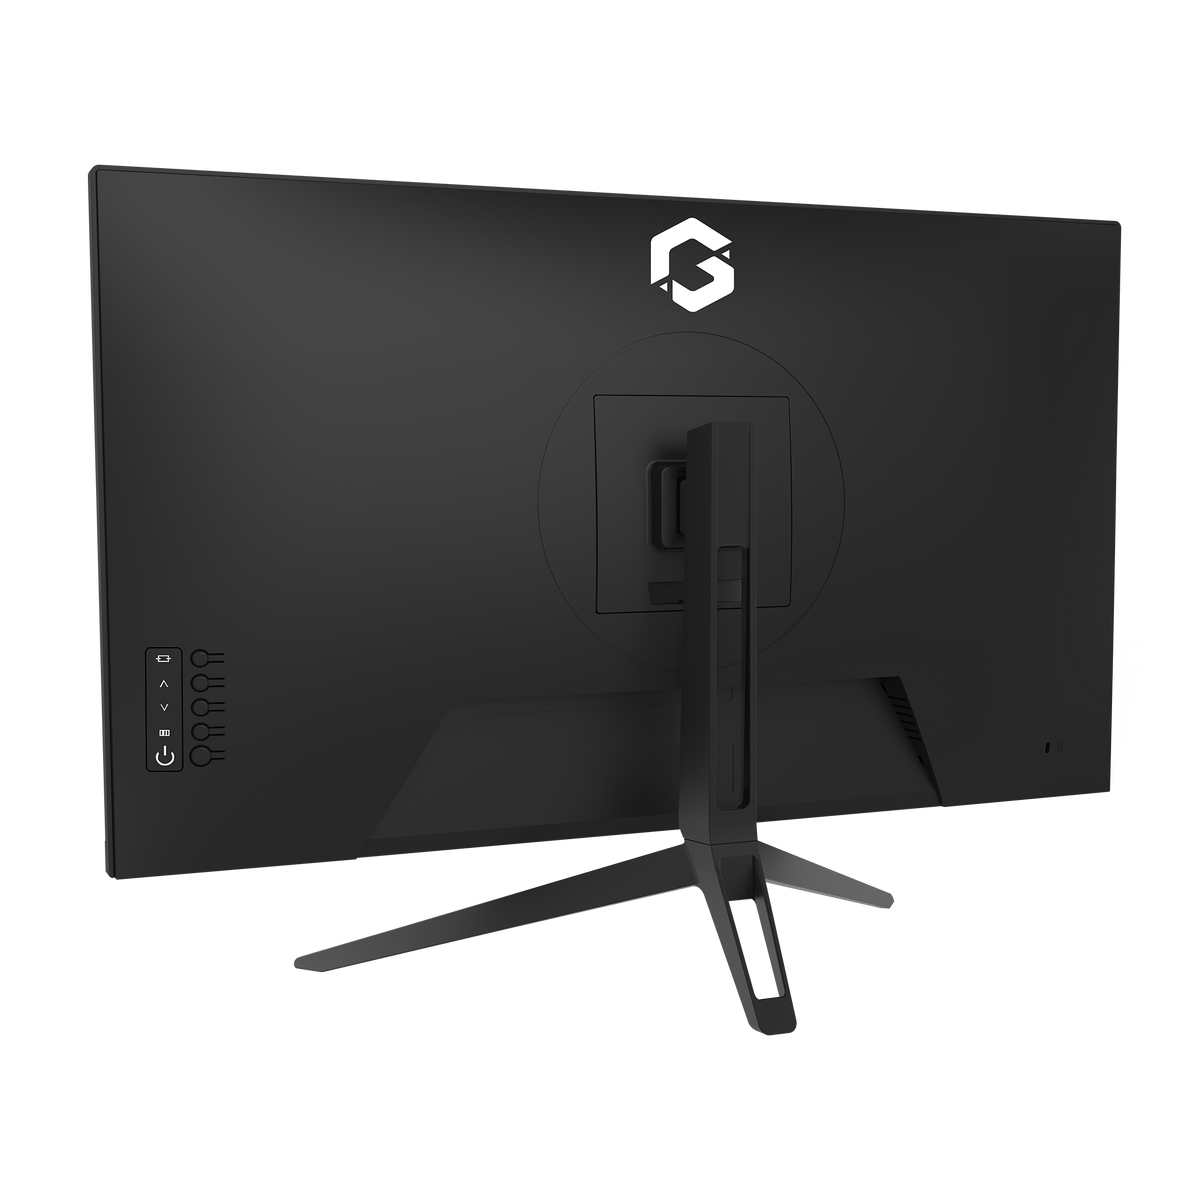 Shop Gaming Monitor 28 GO28UHDIPS Online At Best Price